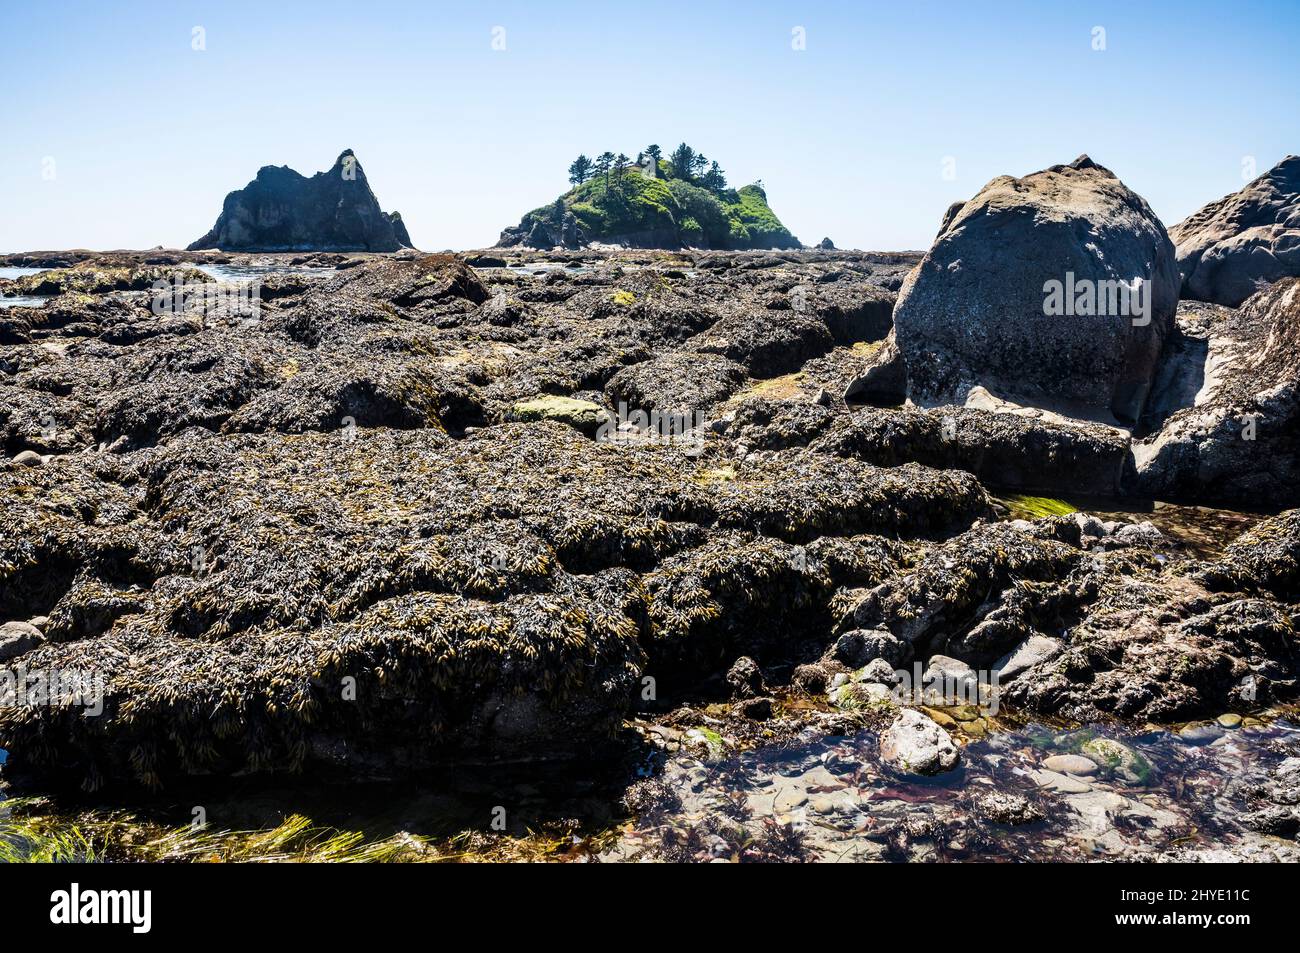 Toleak Point, Low Tide, Mid day, Olympic National Park and Marine Preserve/sanctuary, Washington, USA. Stock Photo